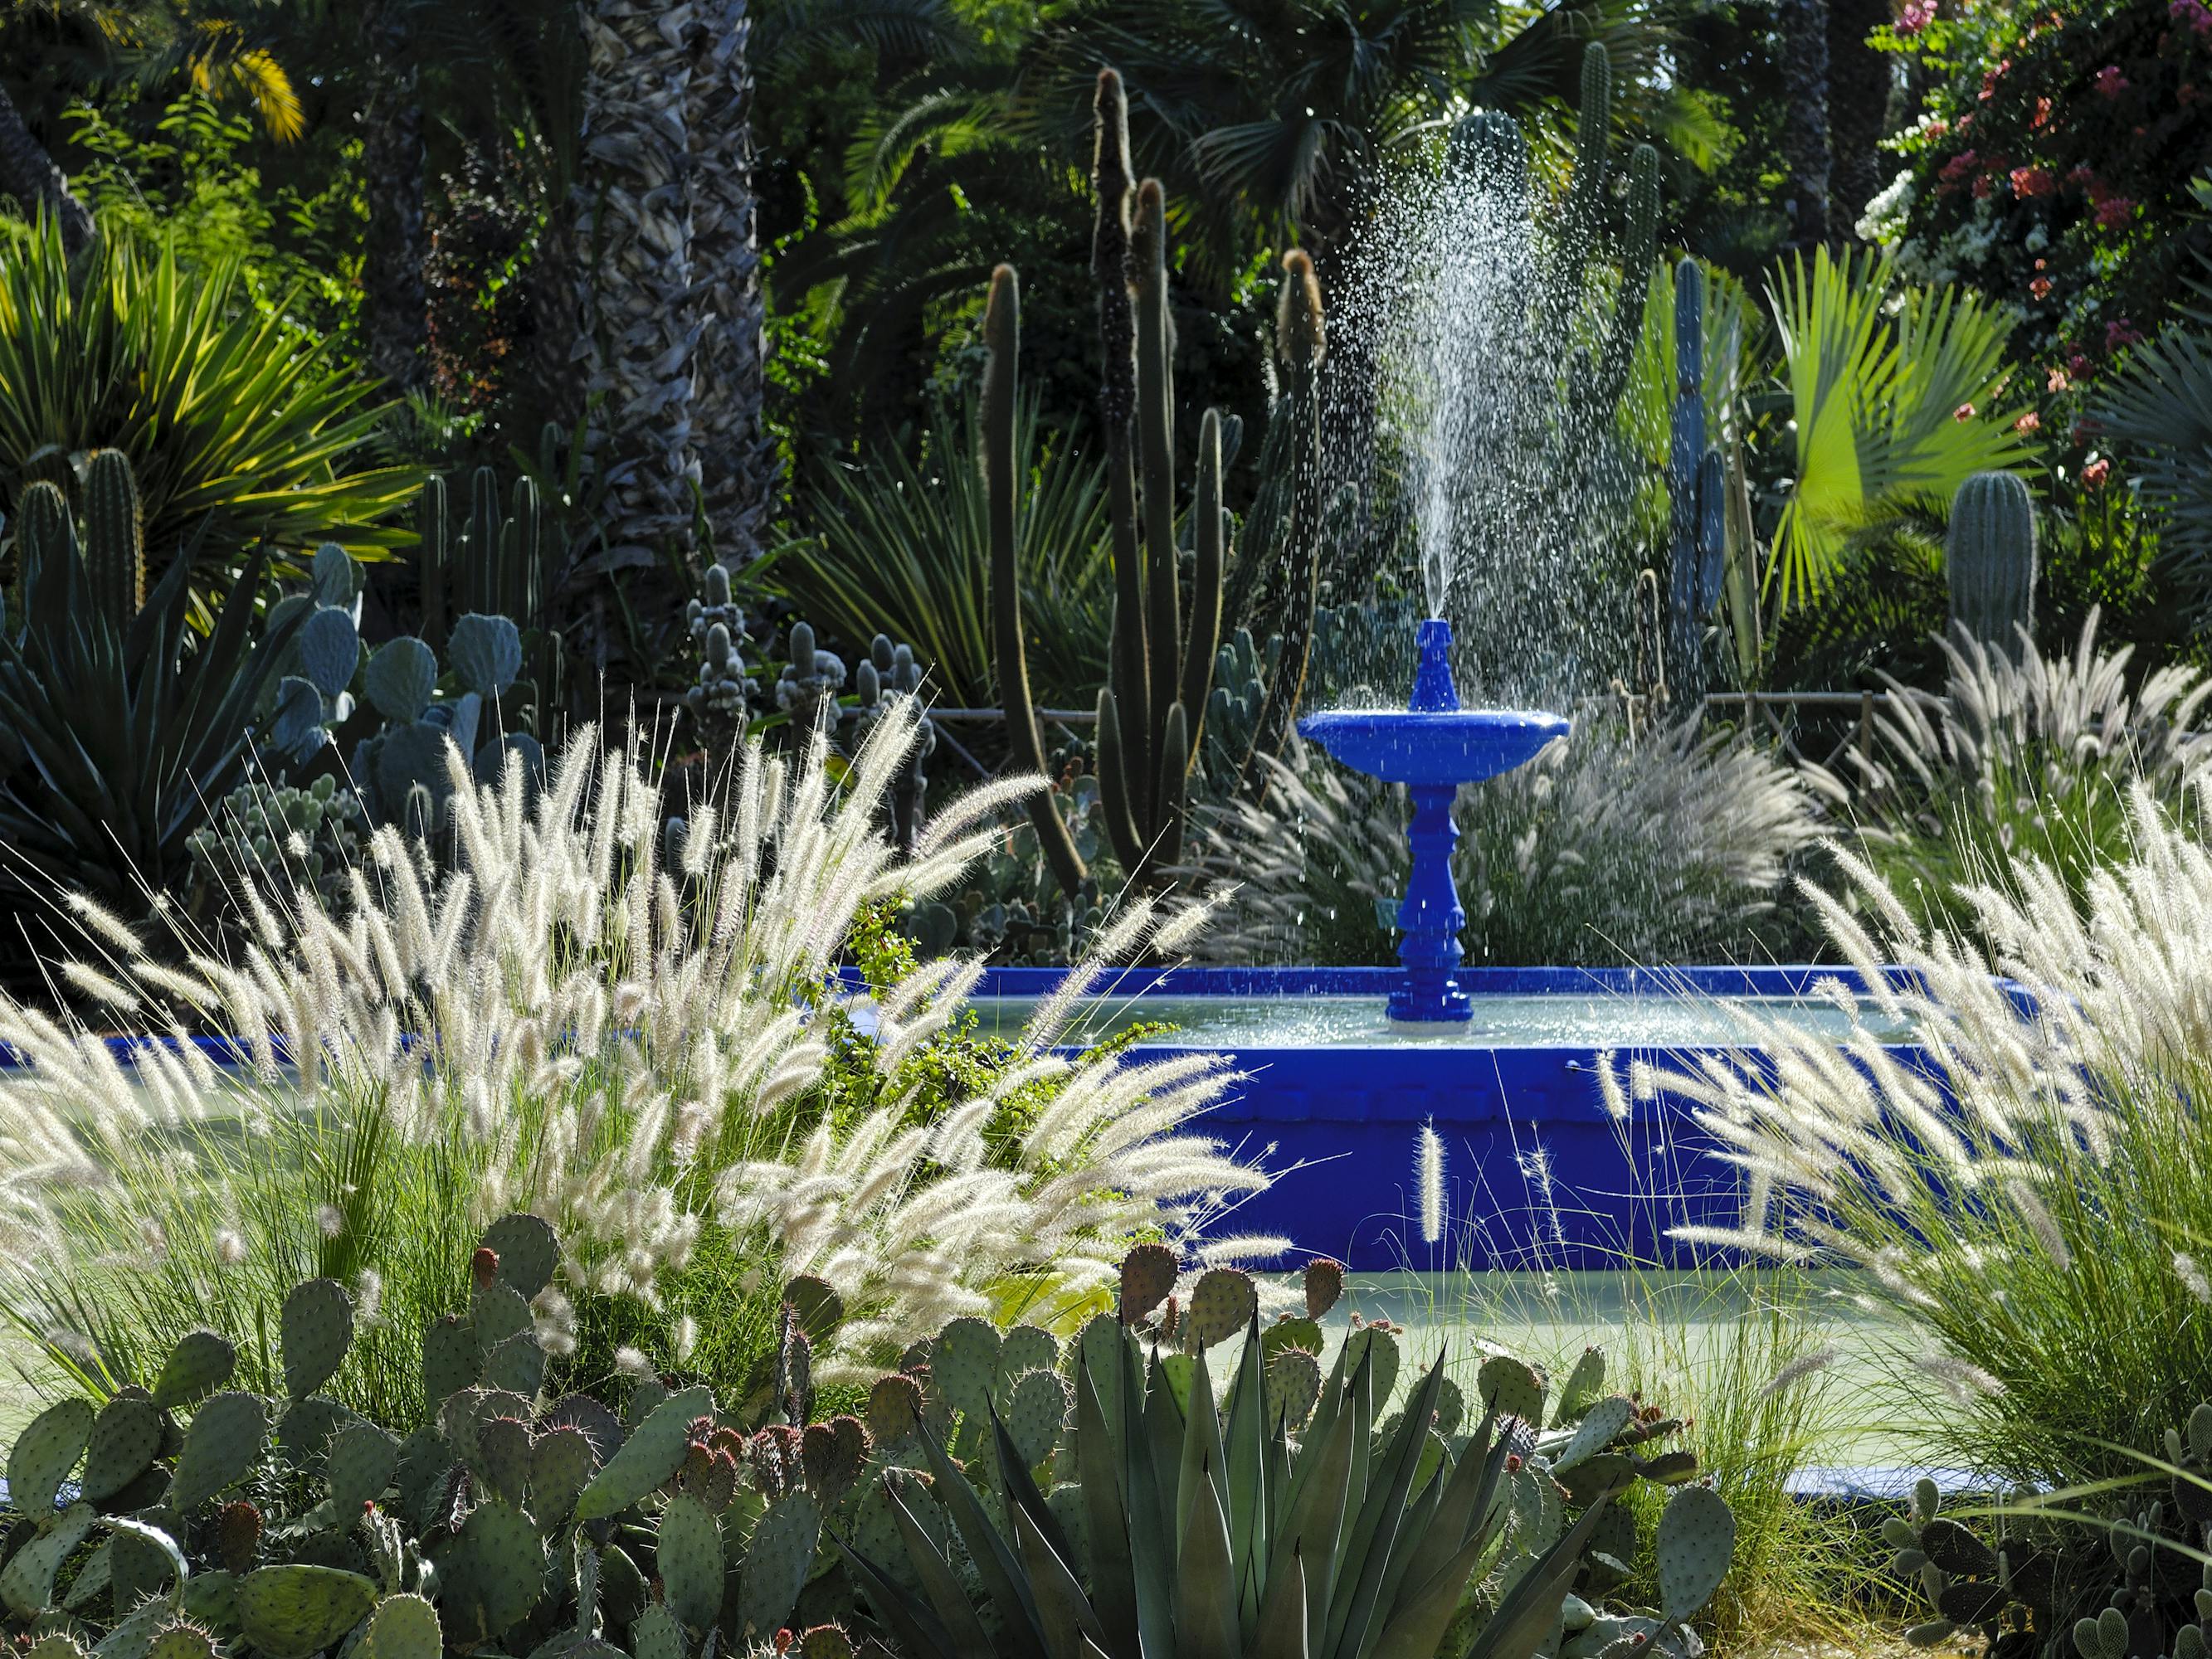 Jardin Majorelle. There is a royal blue fountain and green shrubbery surrounding.